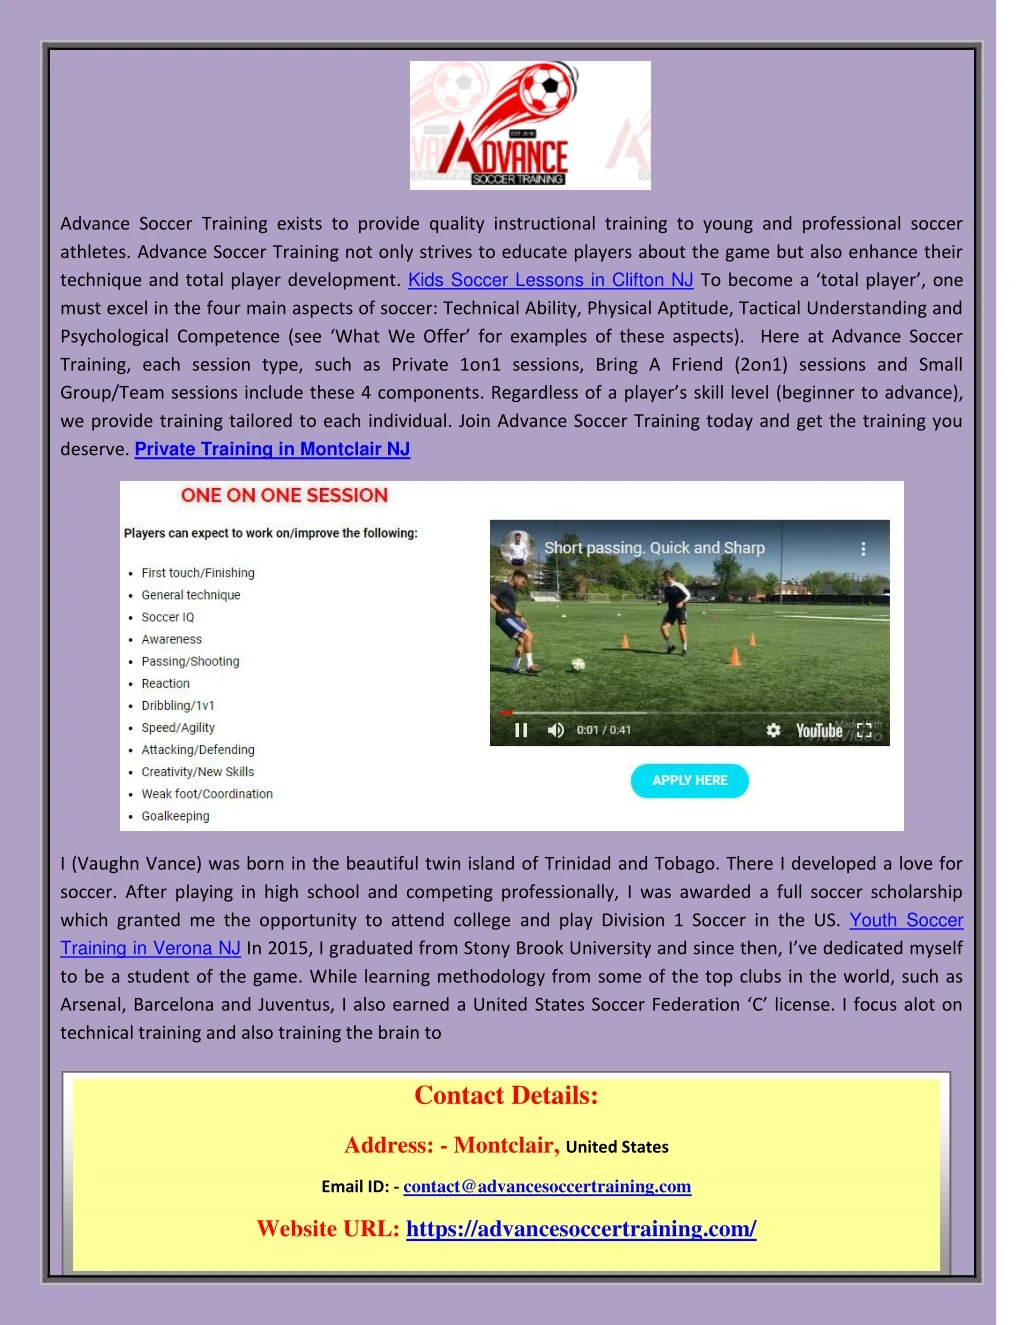 advance soccer training exists to provide quality